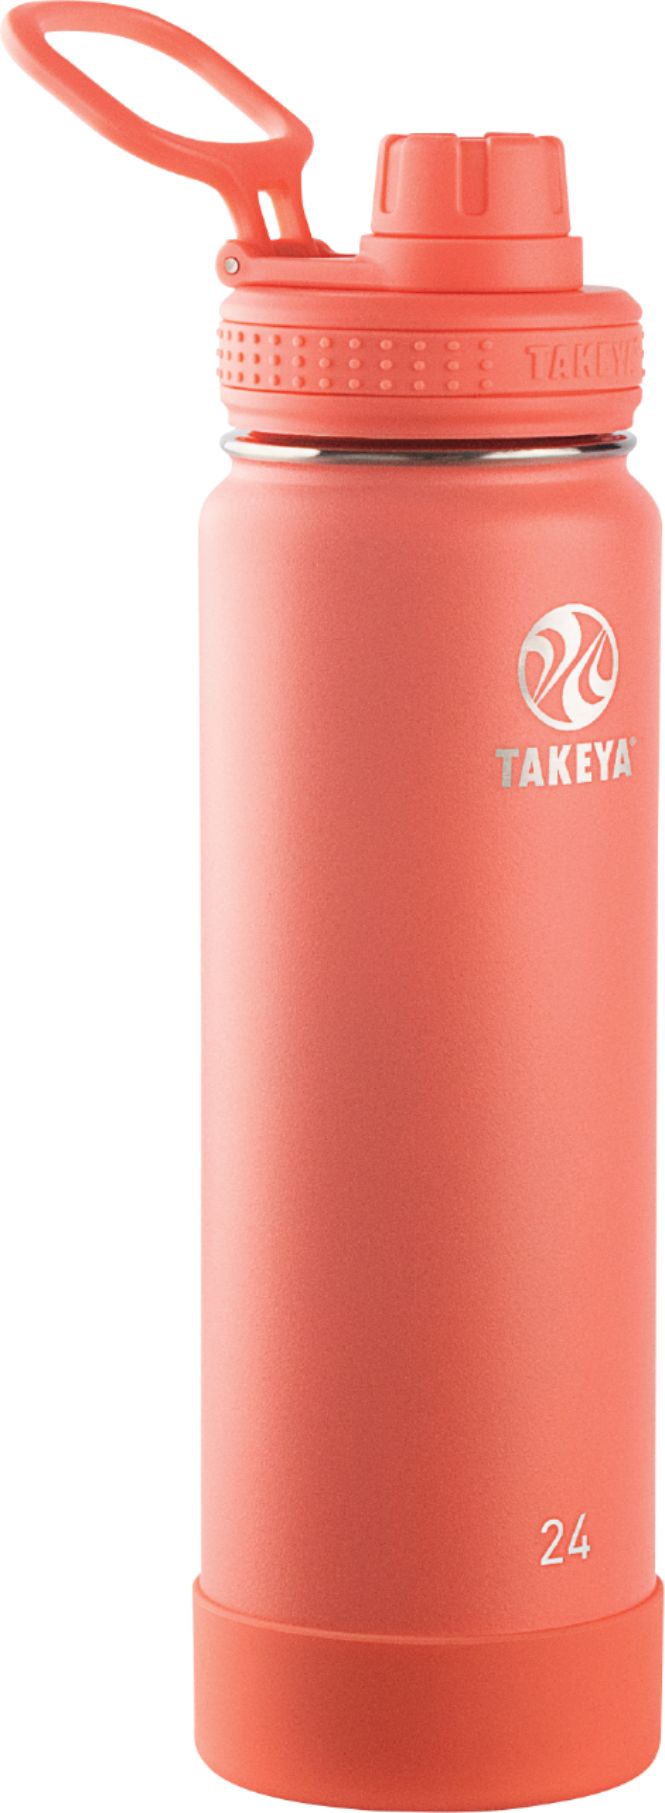 Customer Reviews: Takeya Actives 24-Oz. Insulated Stainless Steel Water  Bottle with Spout Lid Teal 51048 - Best Buy